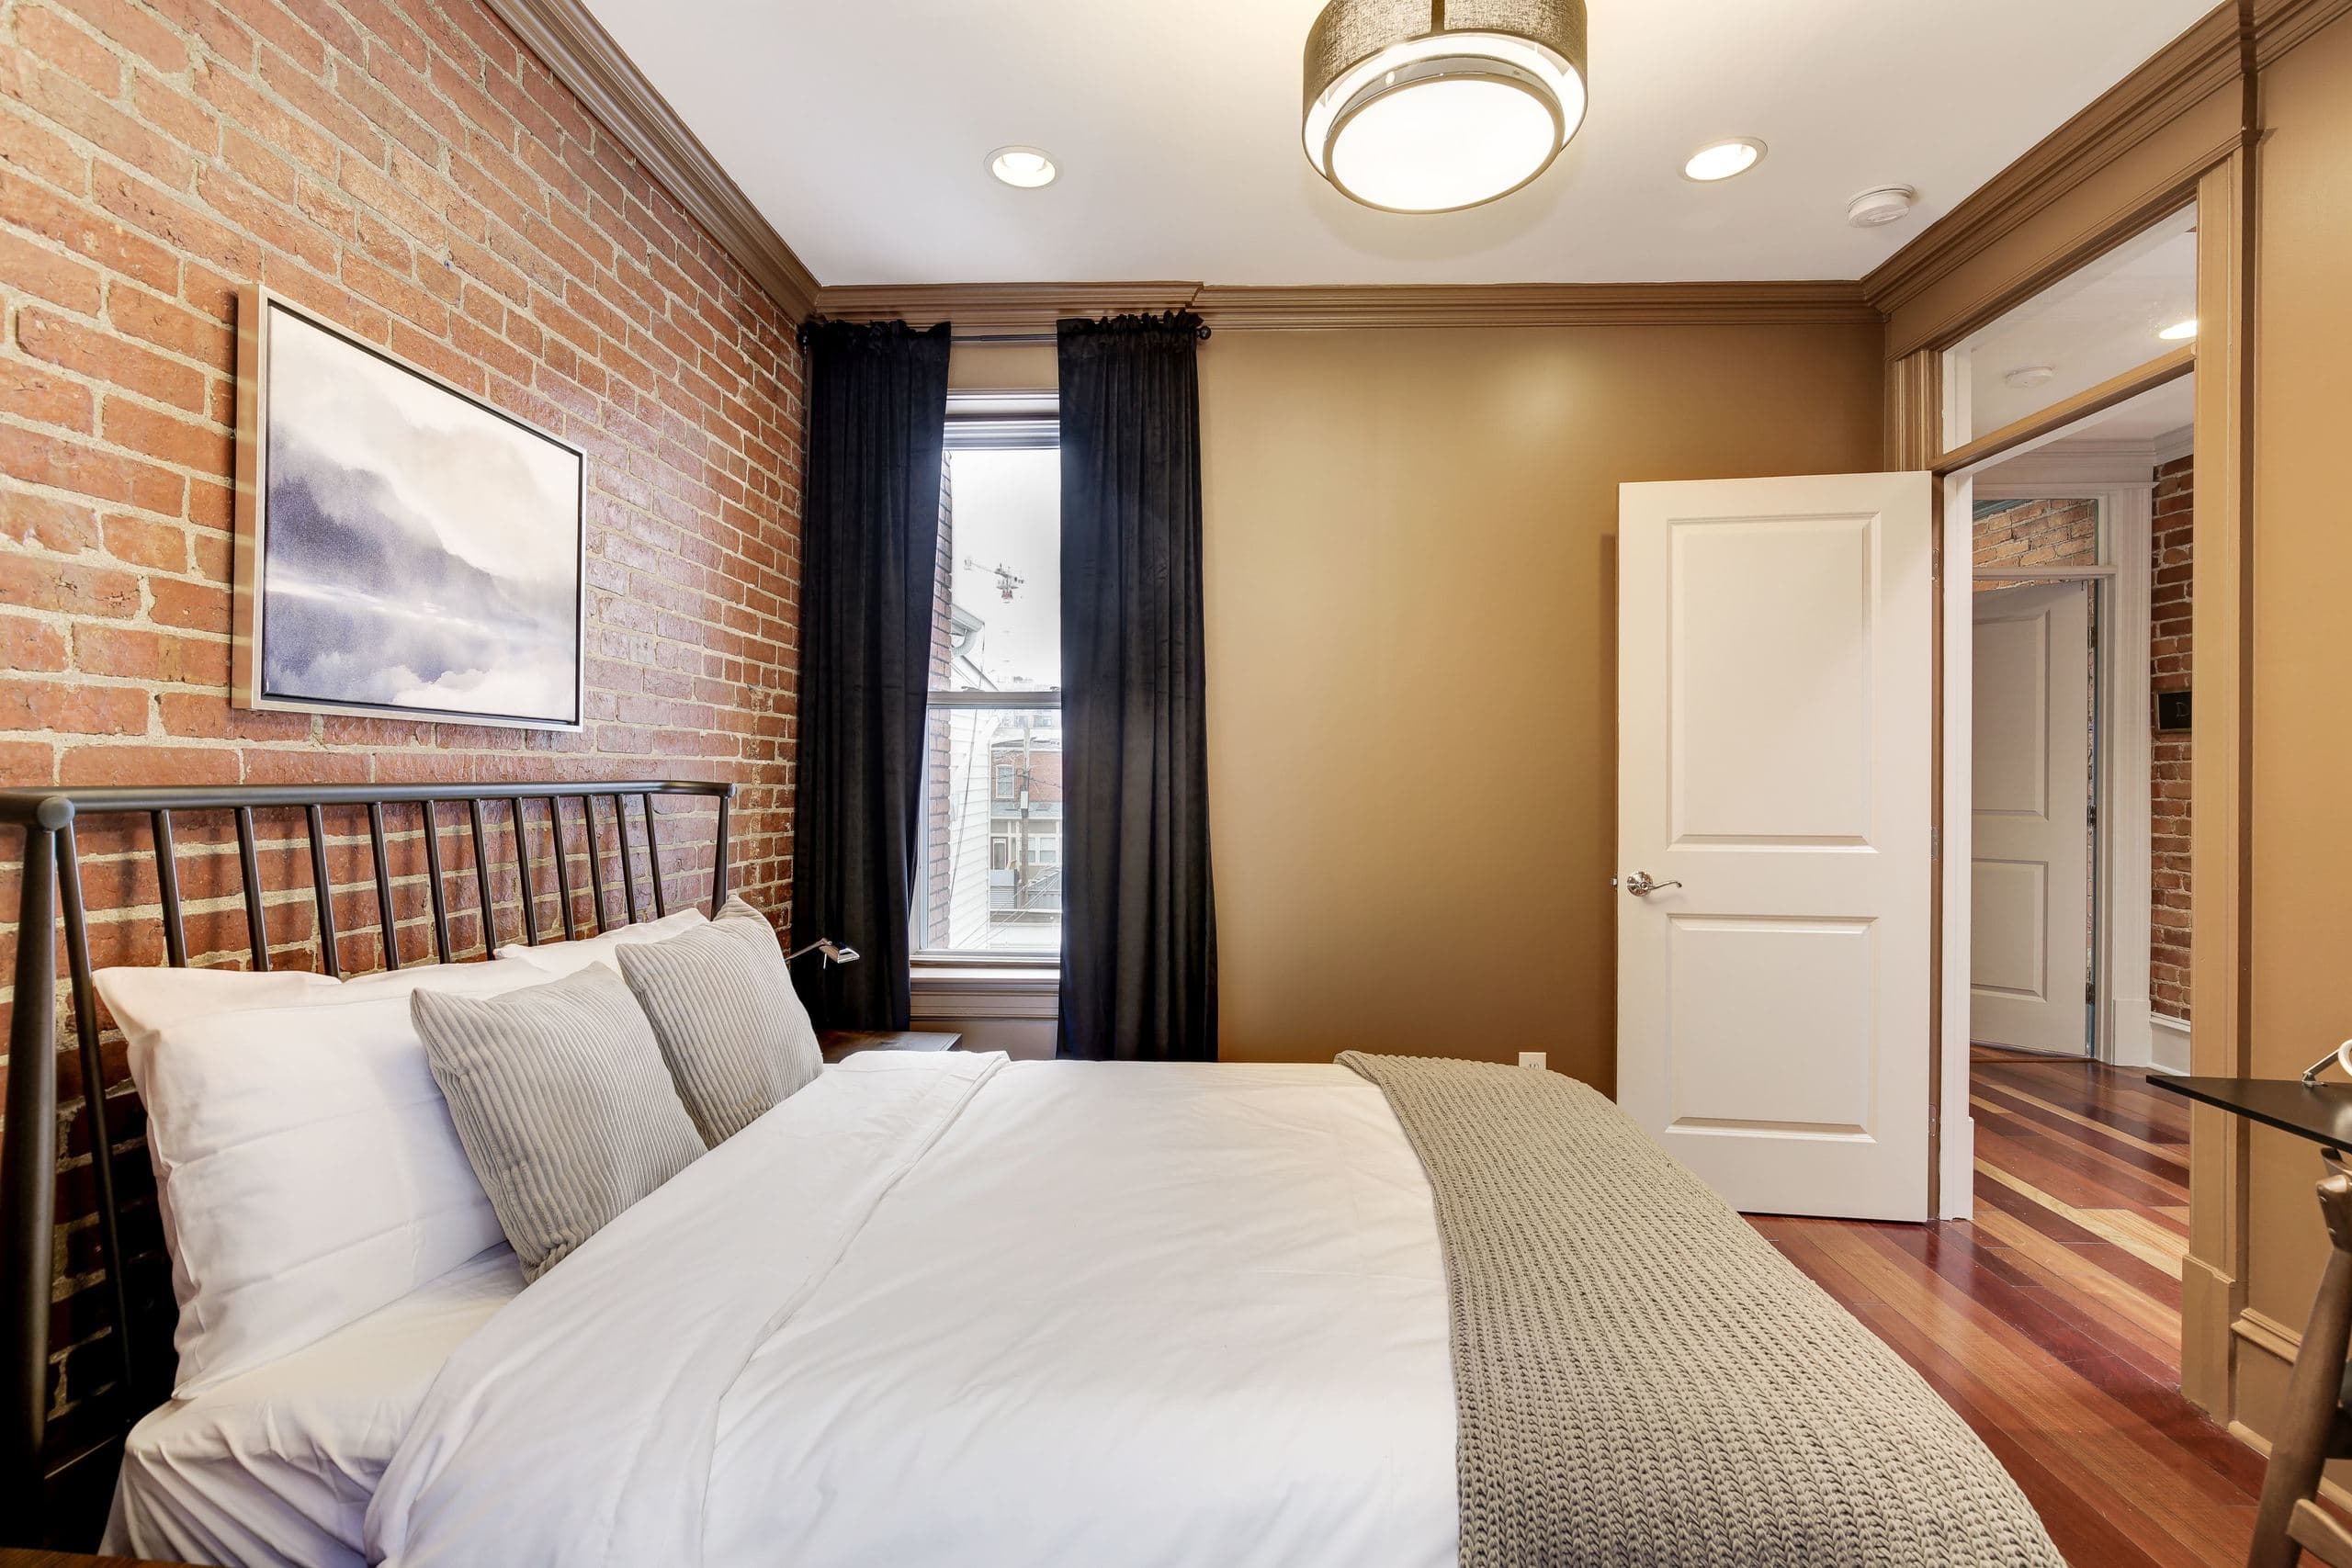 Photo 23 of #187: Queen Bedroom A at June Homes